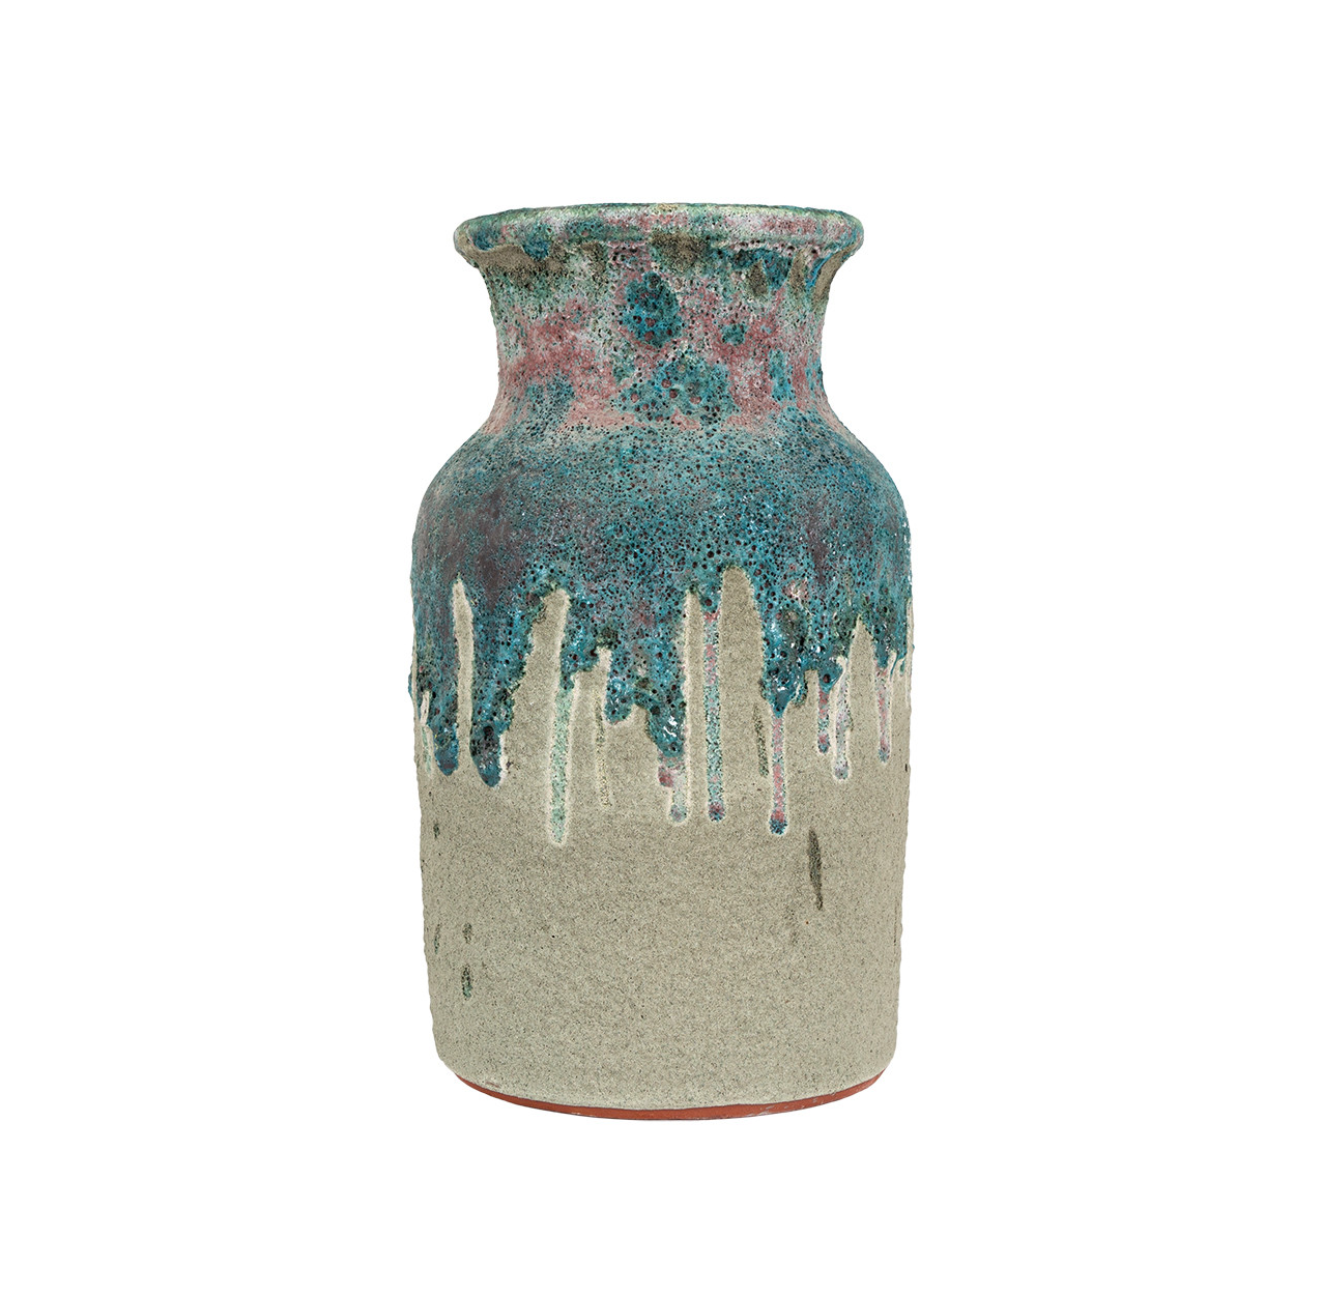 A Harlem vase from The Import Collection with a rough beige lower half and a glossy turquoise glaze dripping from the top half, isolated on a white background, reminiscent of a Scottsdale, Arizona bungalow style.